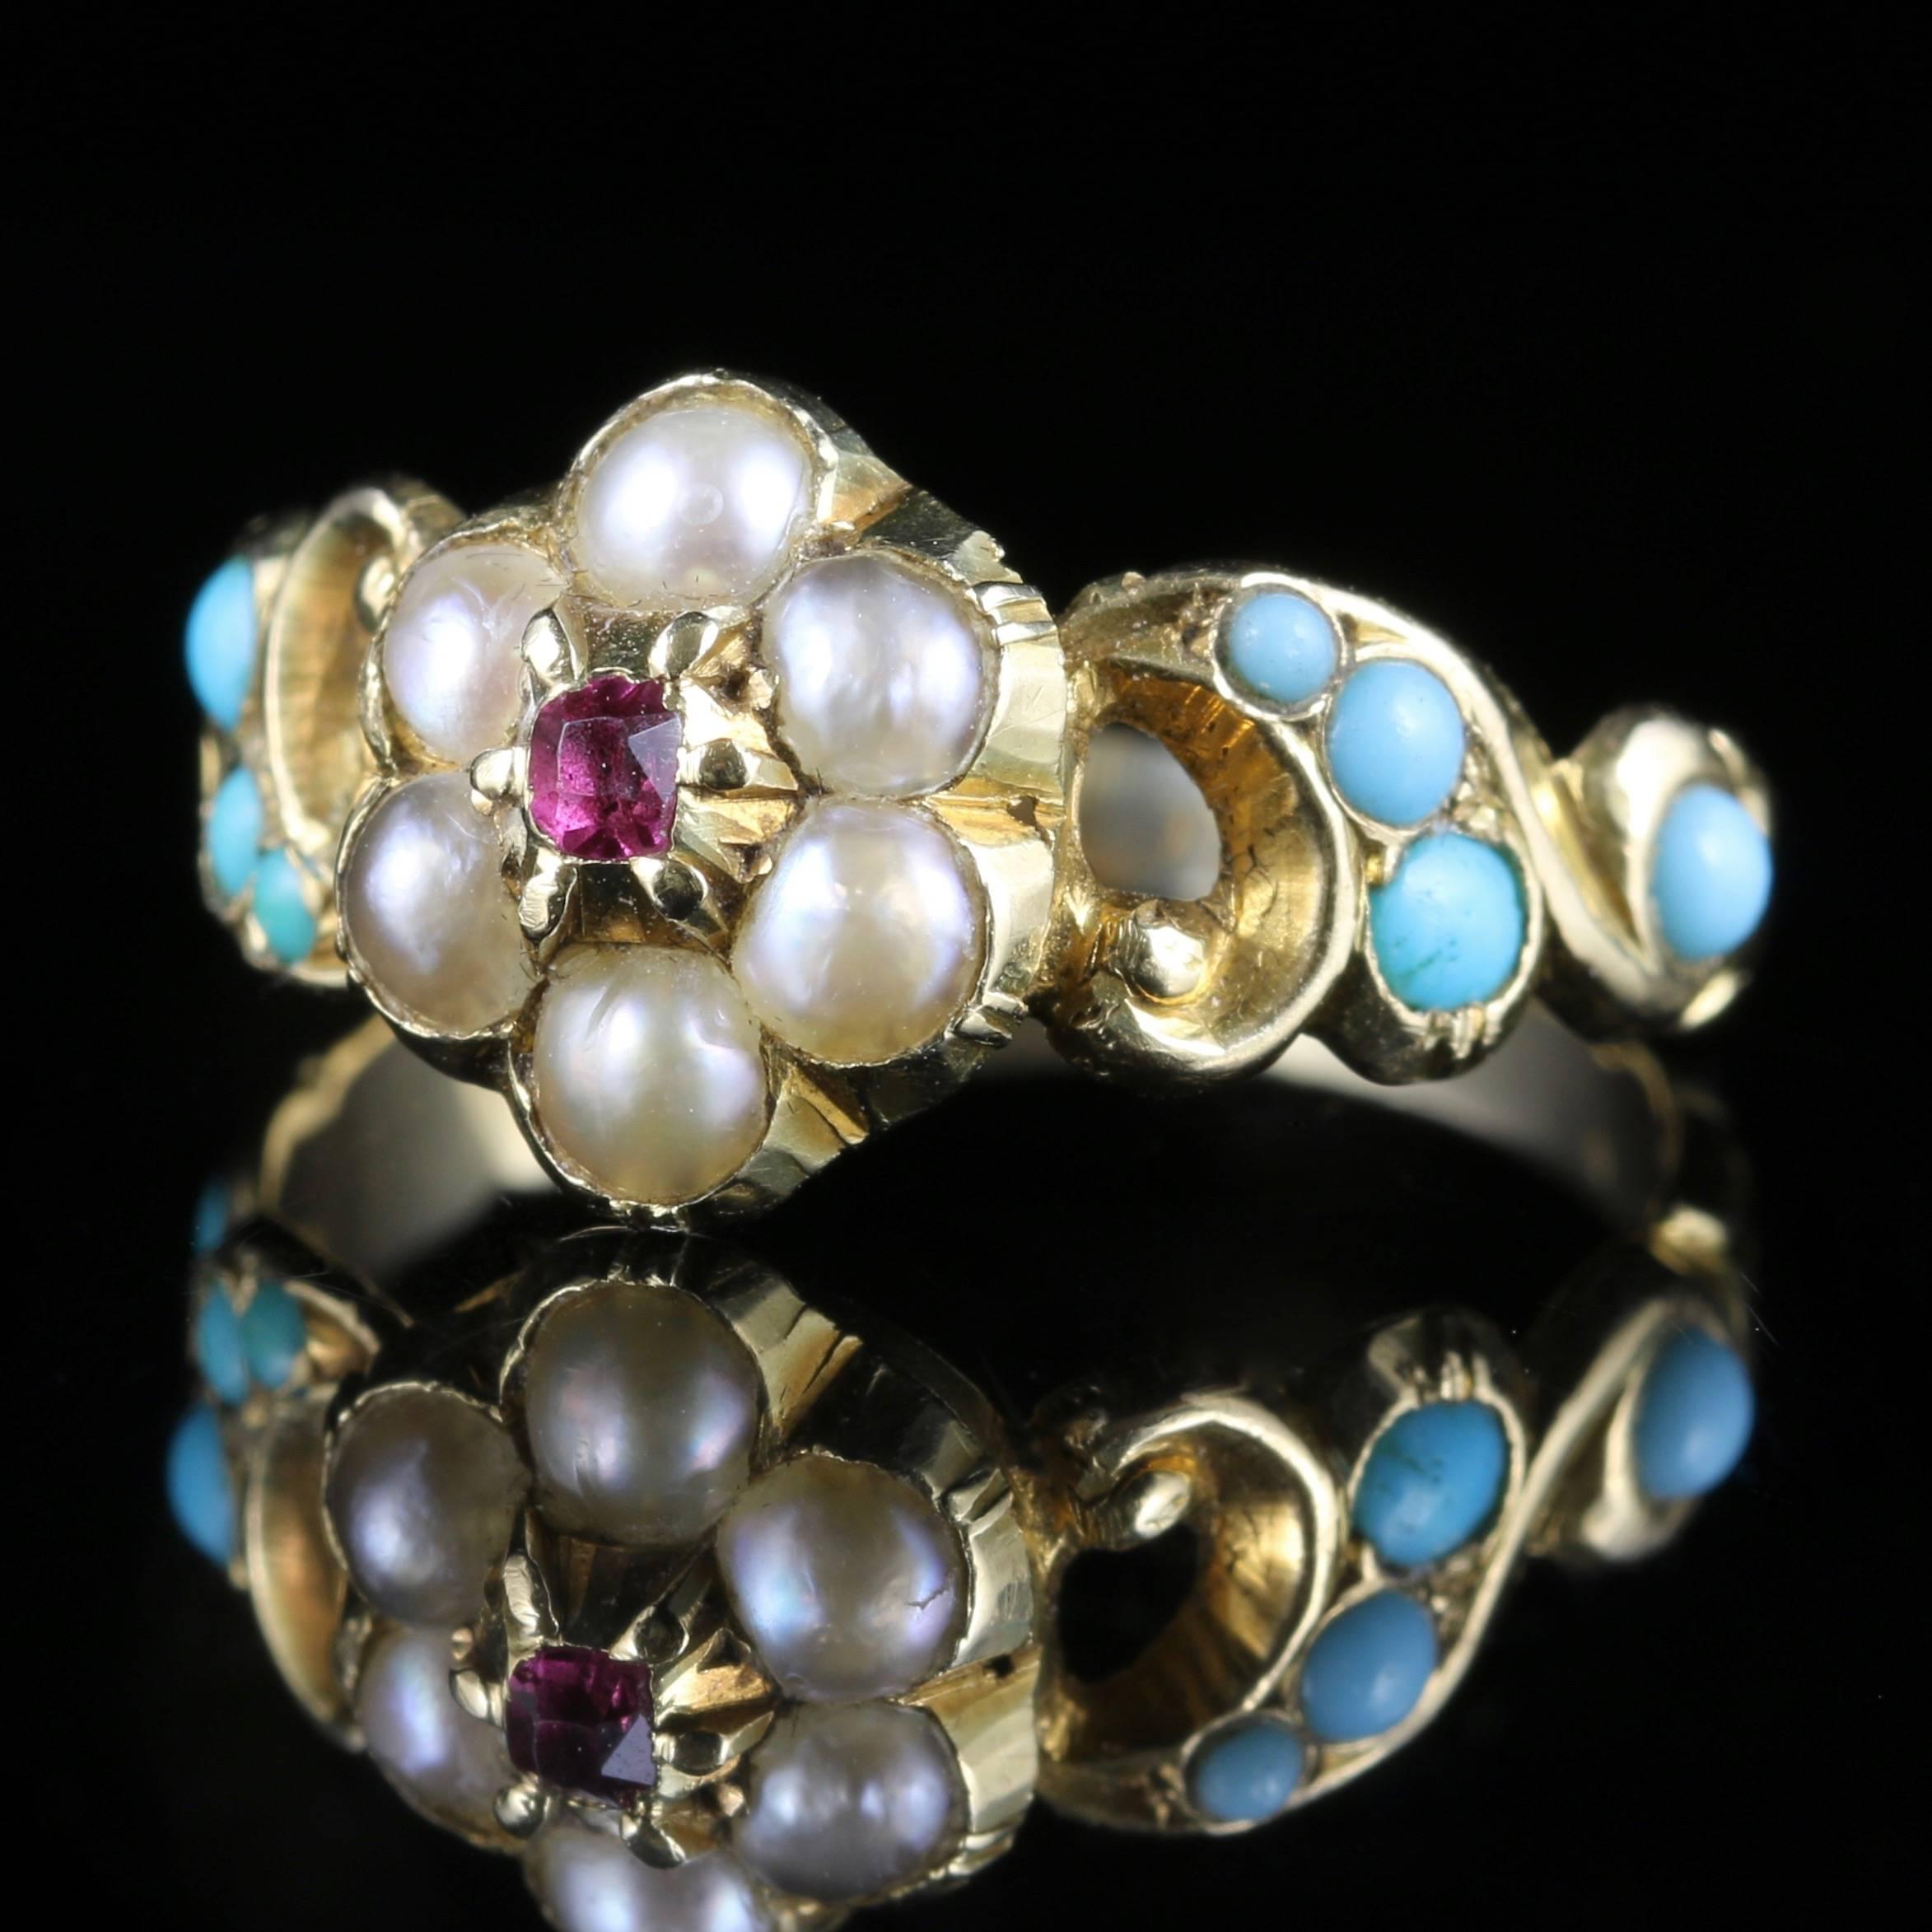 This is a stunning Georgian 18ct yellow Gold Antique ring Circa 1800, set with fabulous Georgian workmanship of its time, all original to the gallery and shank.

The central stone is a Ruby surrounded by natural Pearls.

Pearls have a wonderful